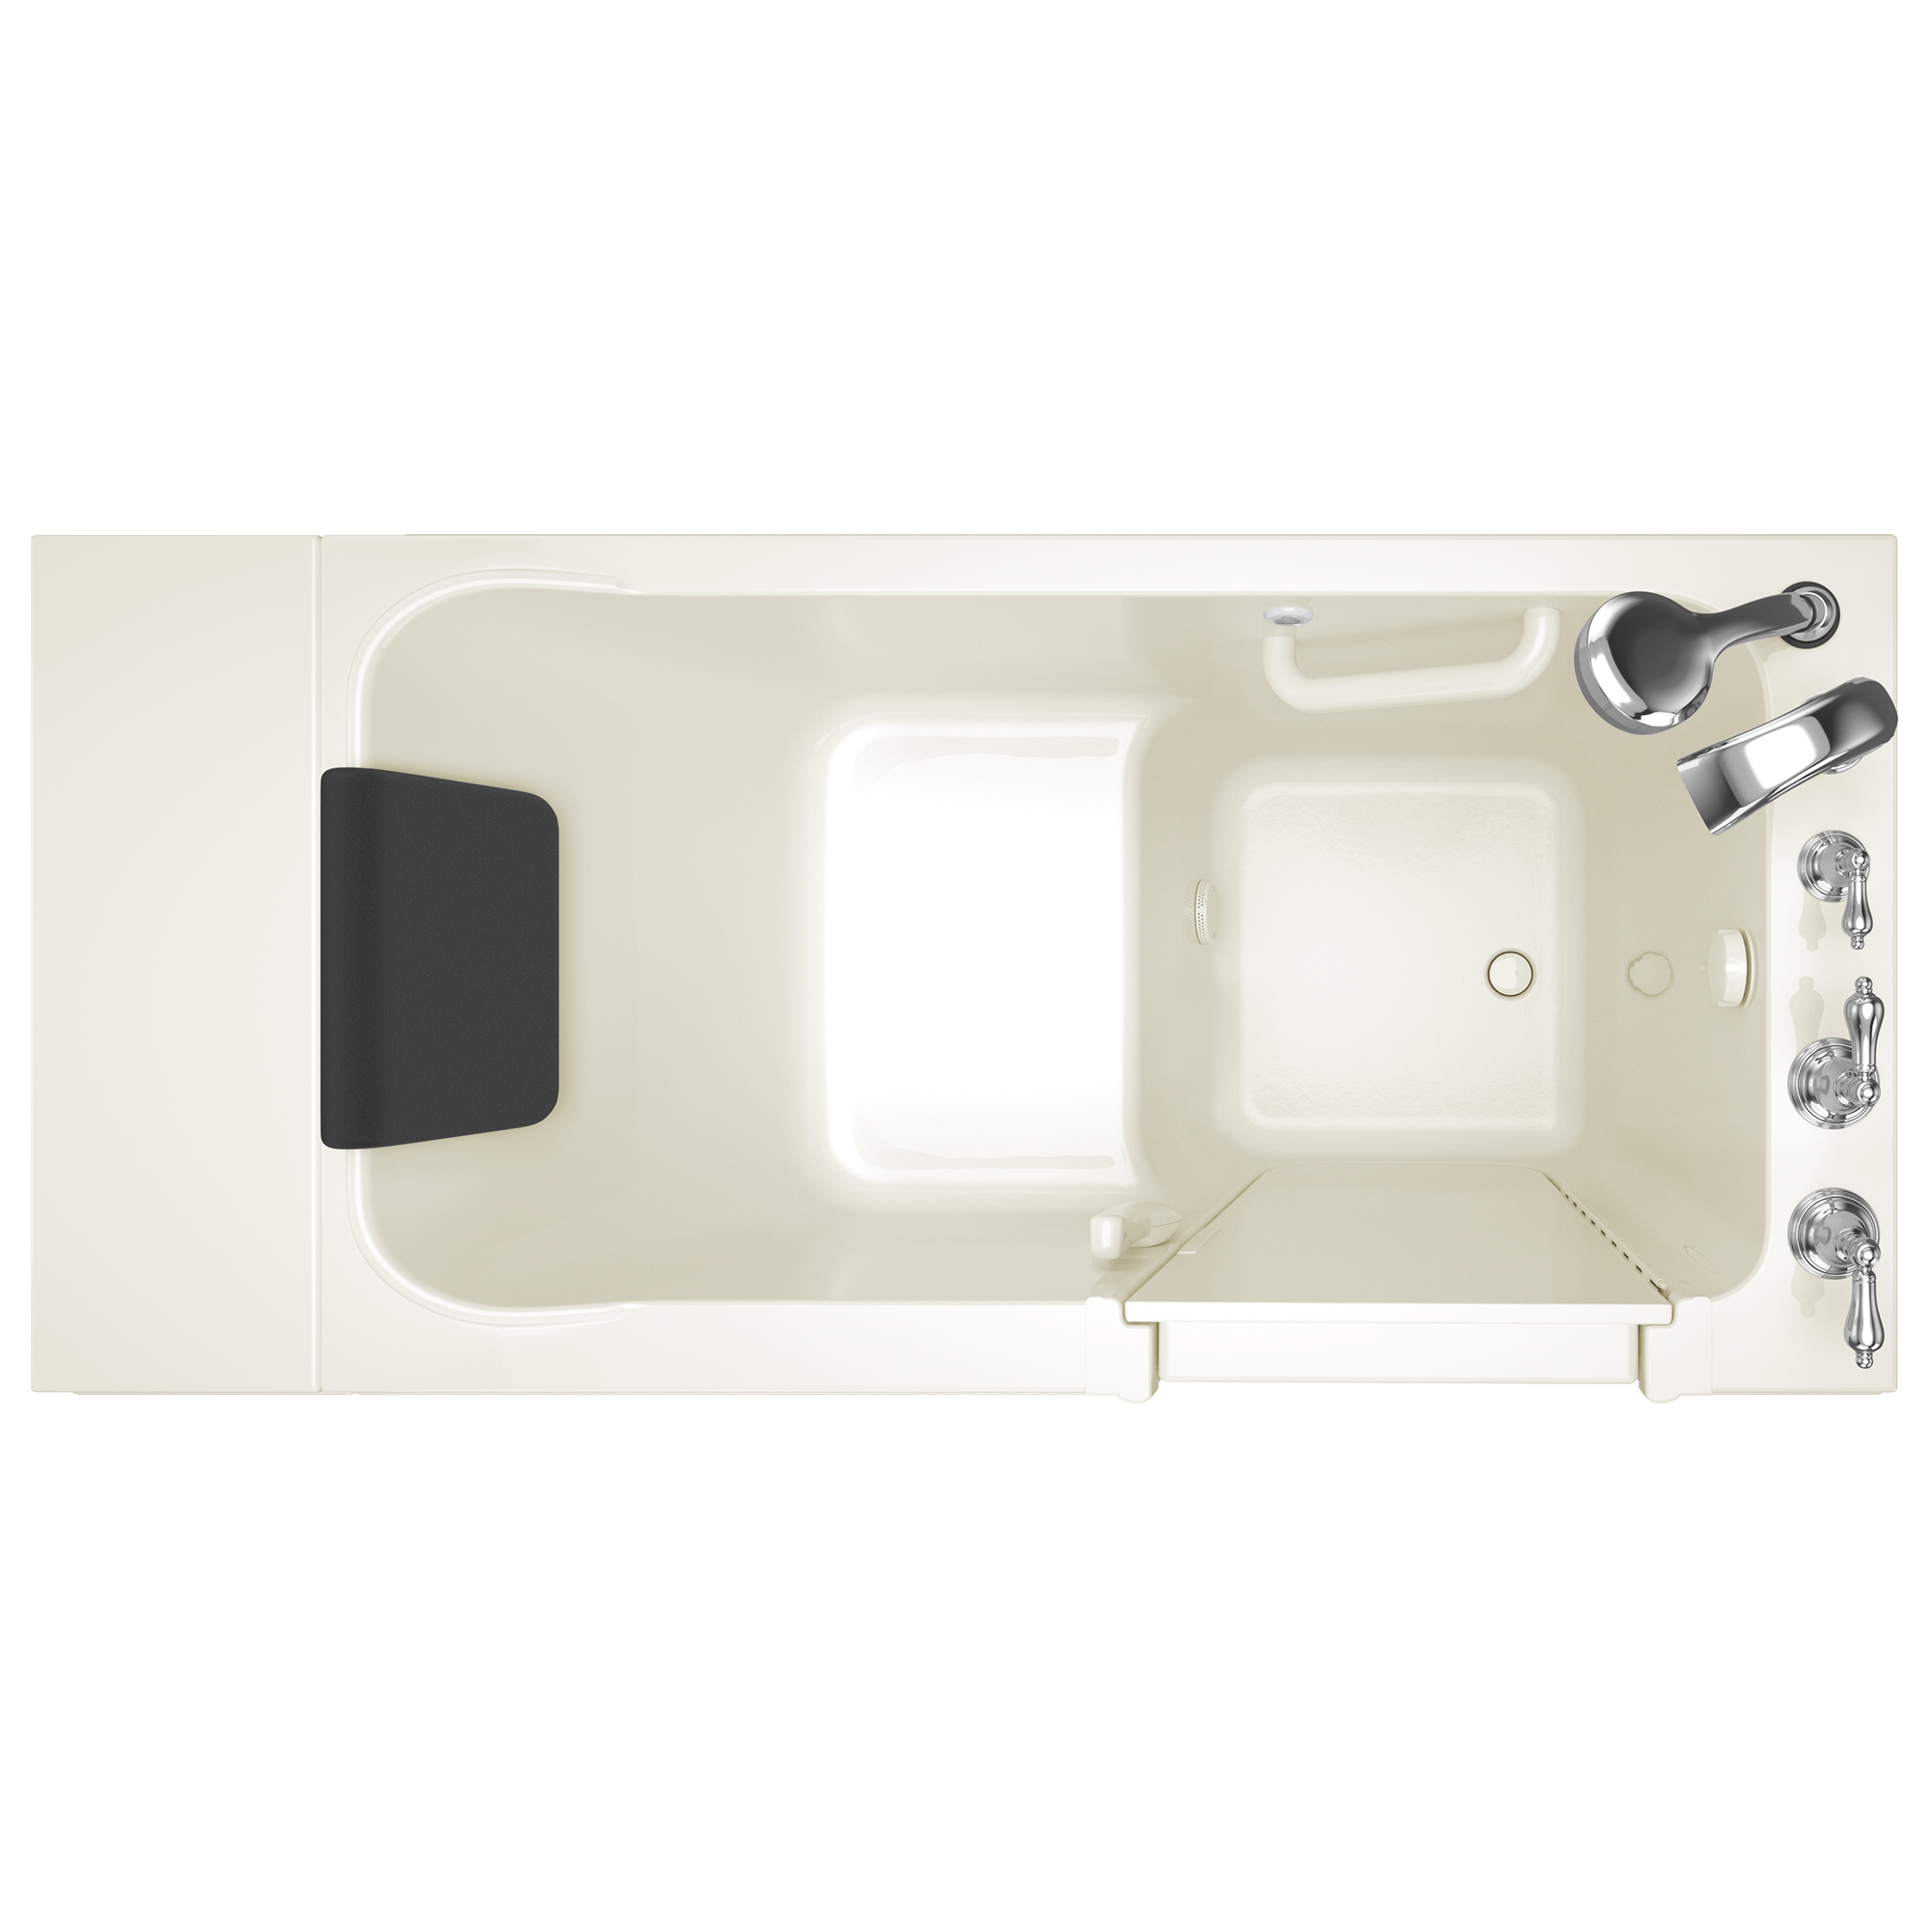 Acrylic Luxury Series 28 x 48 Inch Walk in Tub With Soaker System   Right Hand Drain With Faucet WIB LINEN